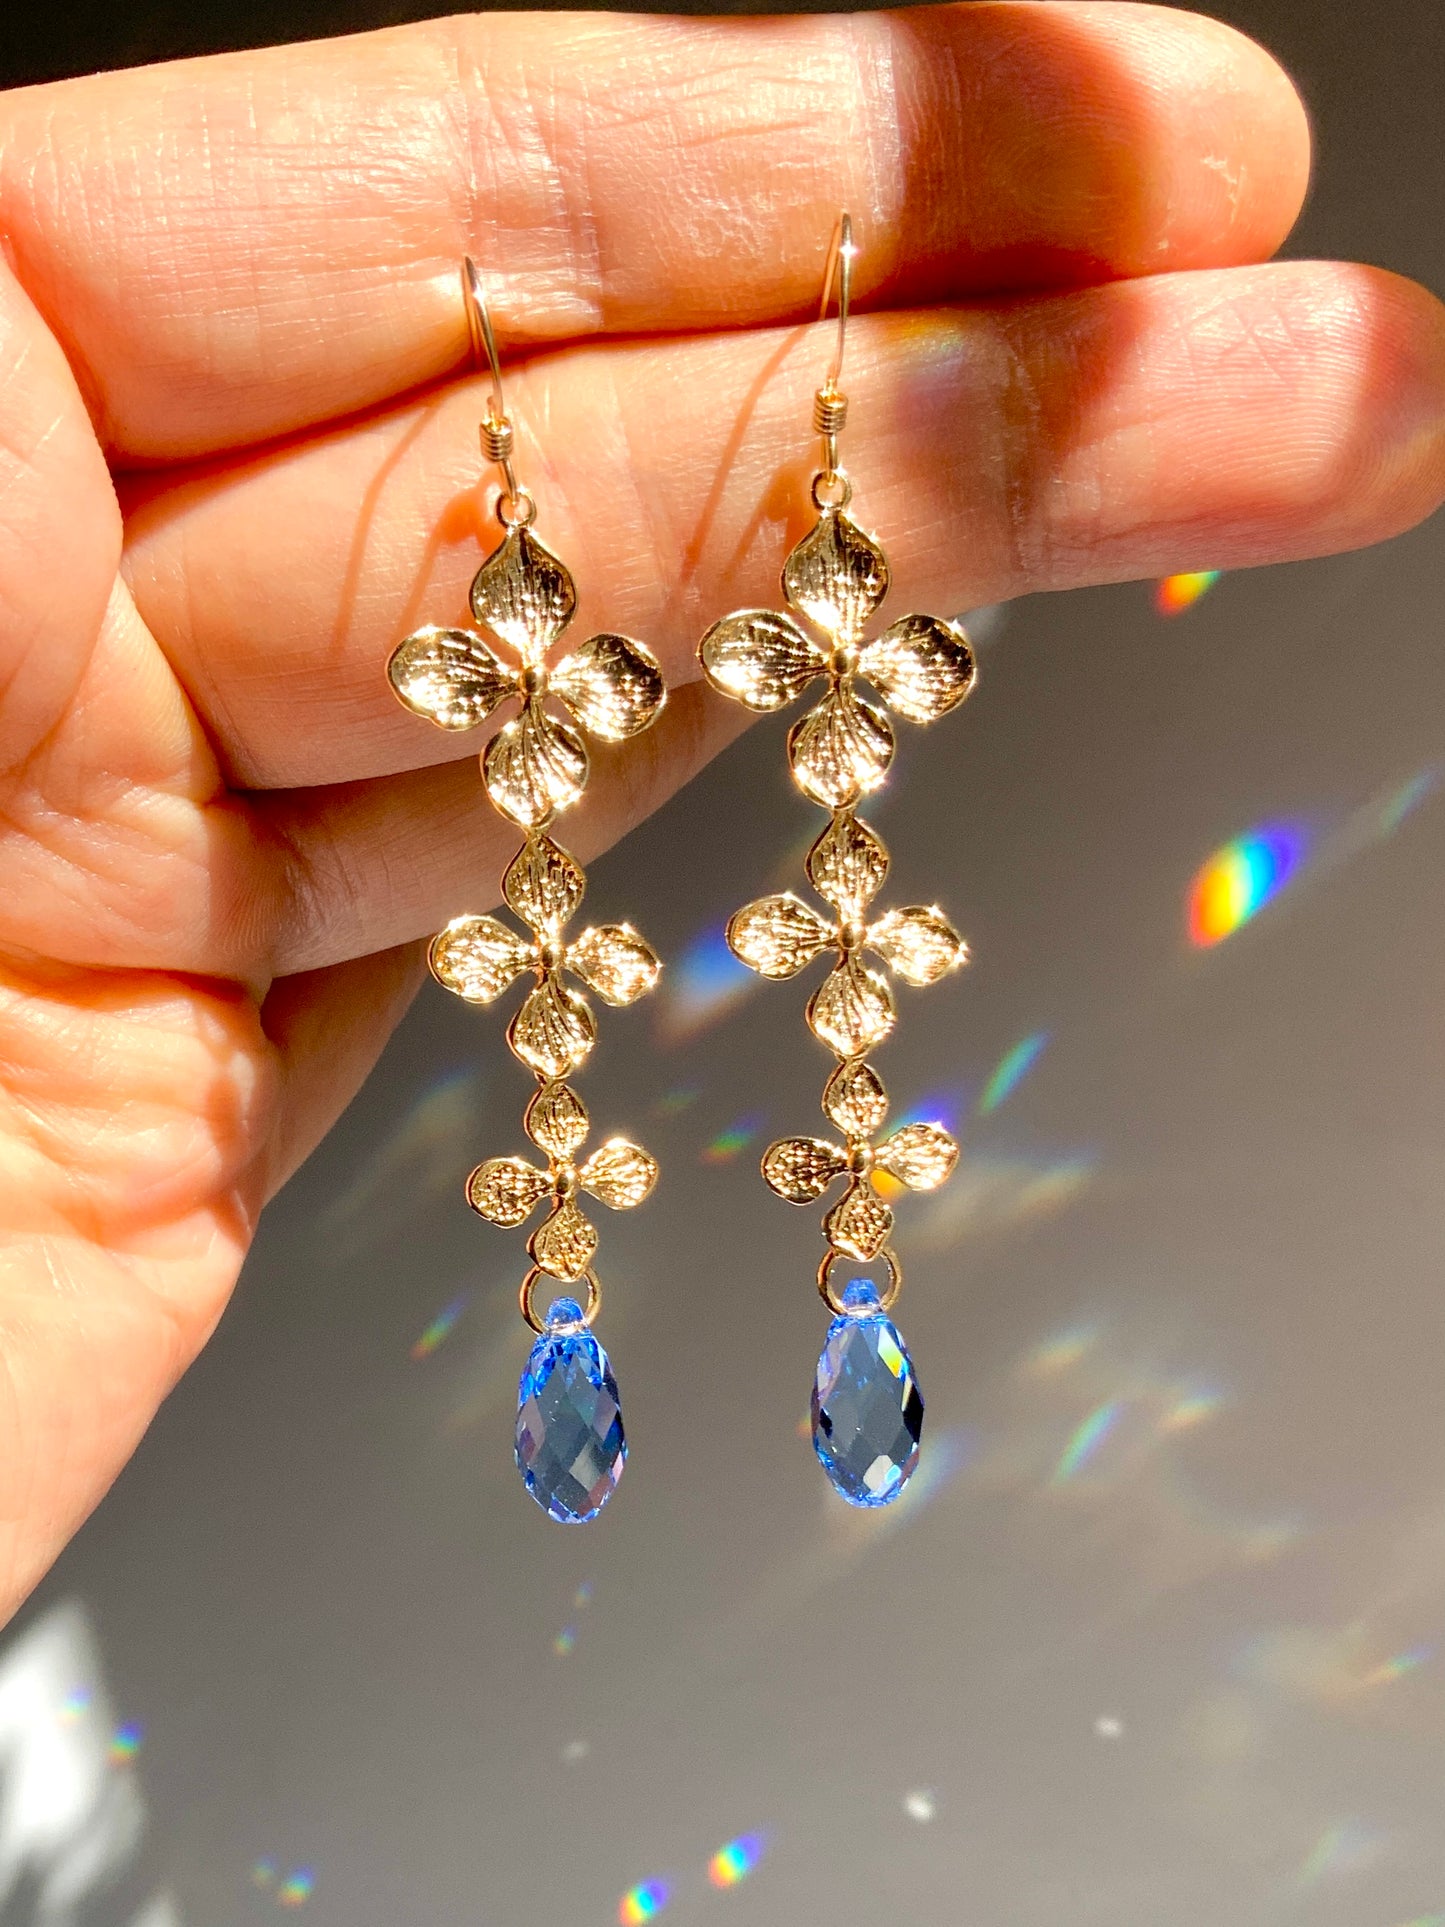 Crystal Prism Hydrangea Earrings~ Choose Your Color, 18k Gold-Plated Flower Suncatcher Jewelry